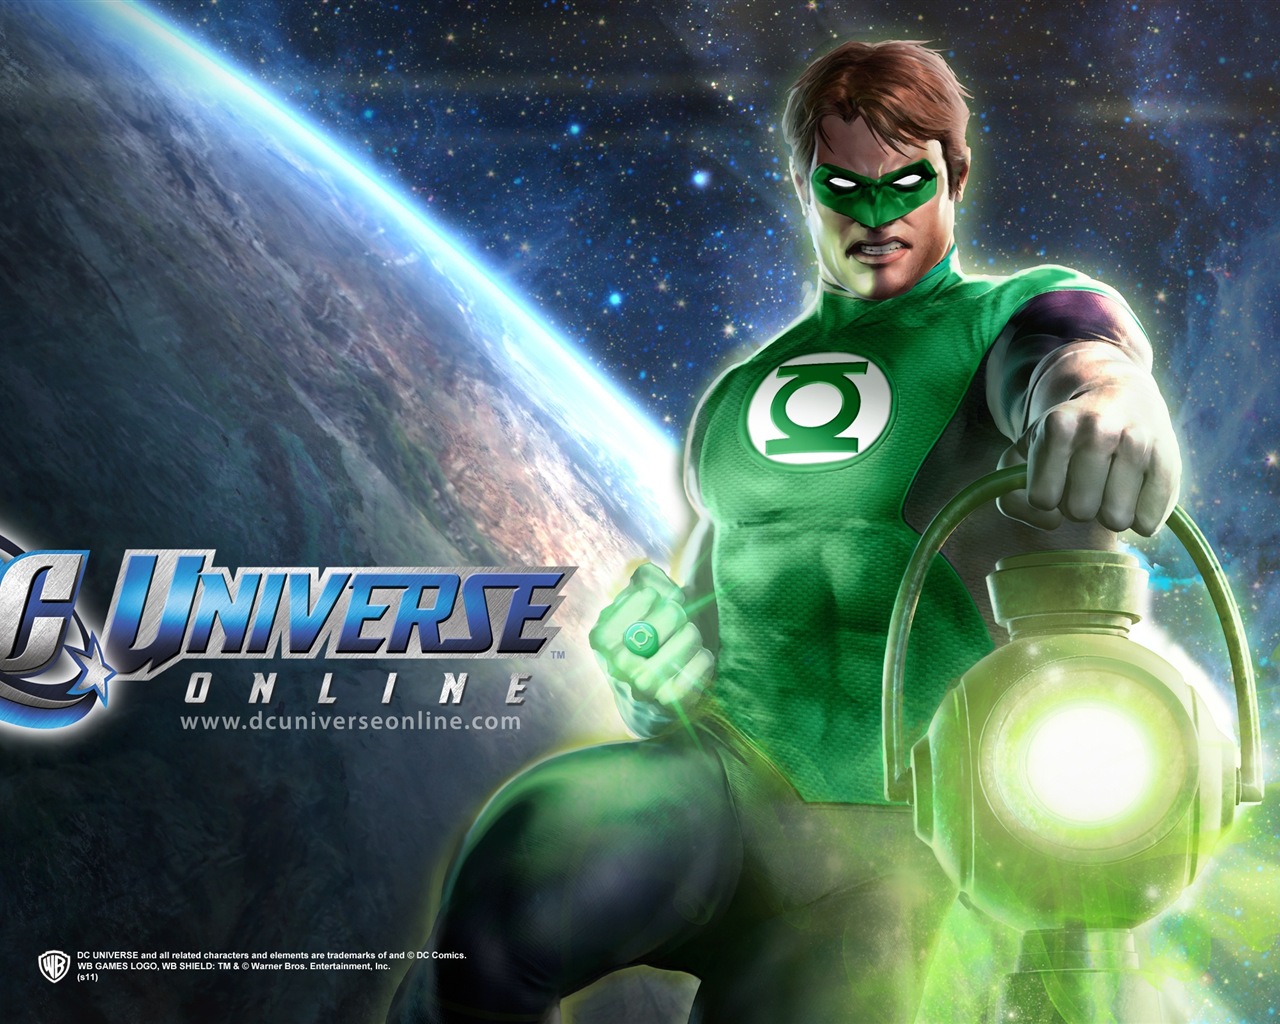 DC Universe Online HD game wallpapers #17 - 1280x1024